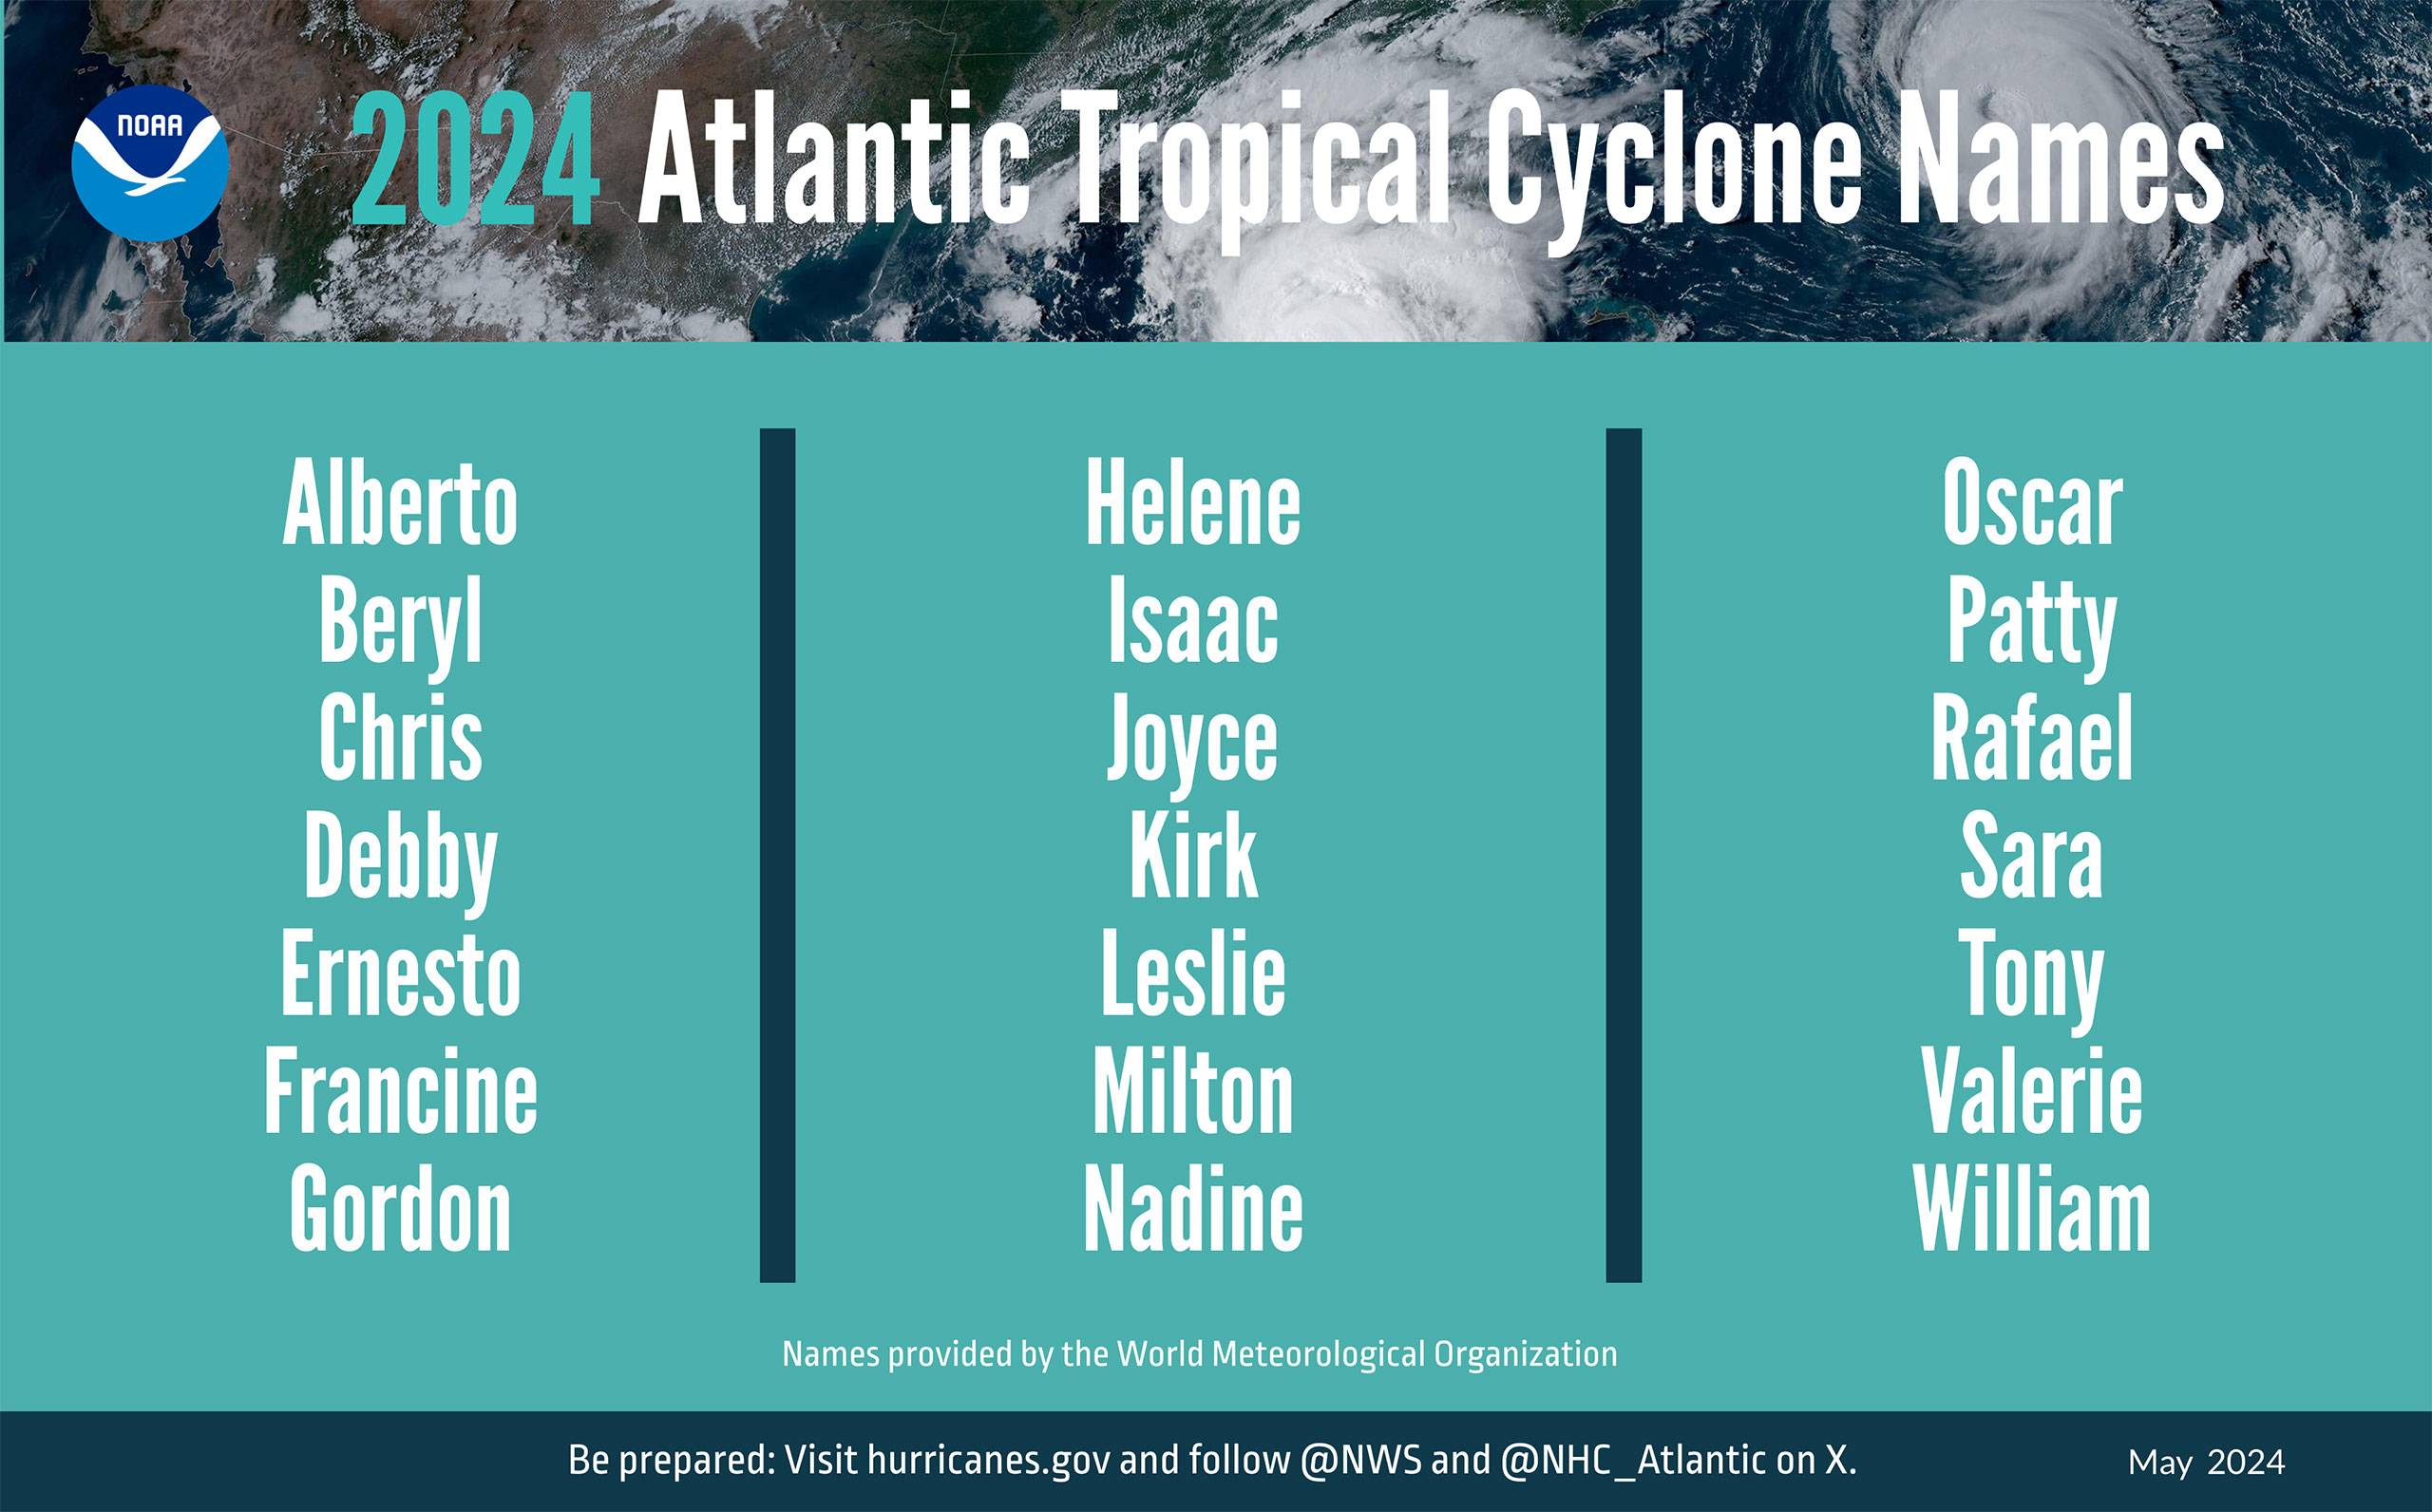 A summary graphic showing an alphabetical list of the 2024 Atlantic tropical cyclone names as selected by the World Meteorological Organization. The official start of the Atlantic hurricane season is June 1 and runs through November 30. (Image credit: NOAA)